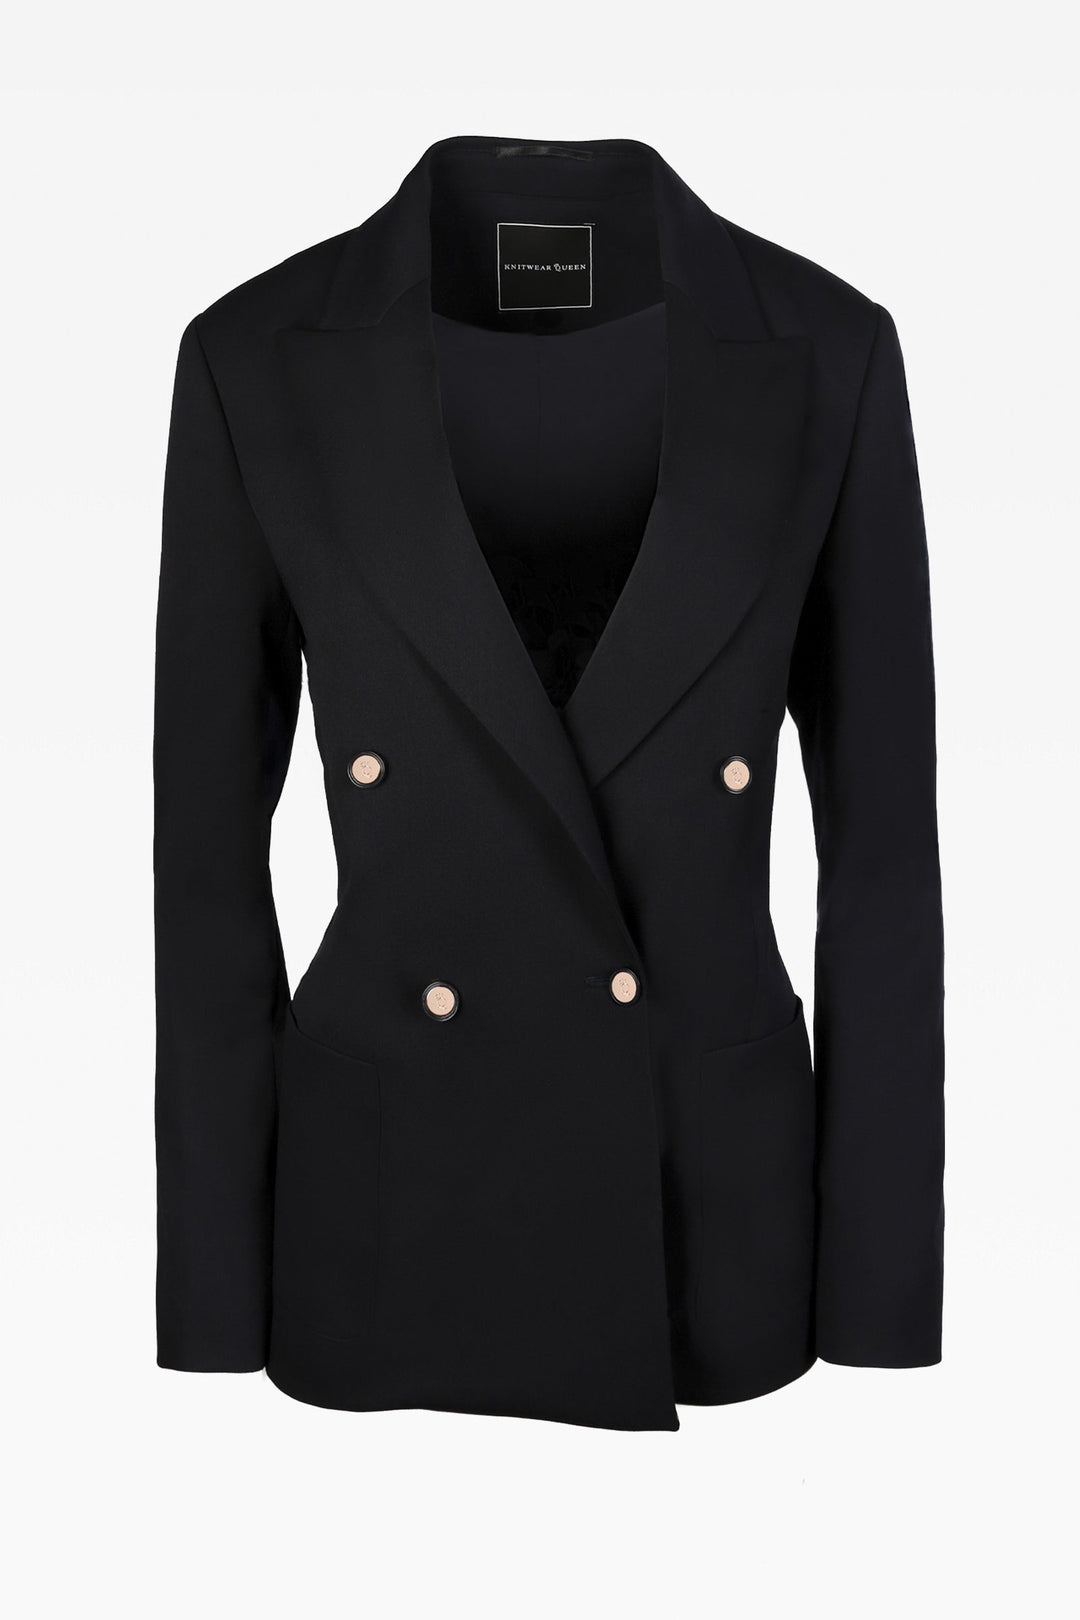 Carrie Black Double Breasted Jacket: Tailored Elegance Essential for Modern Women